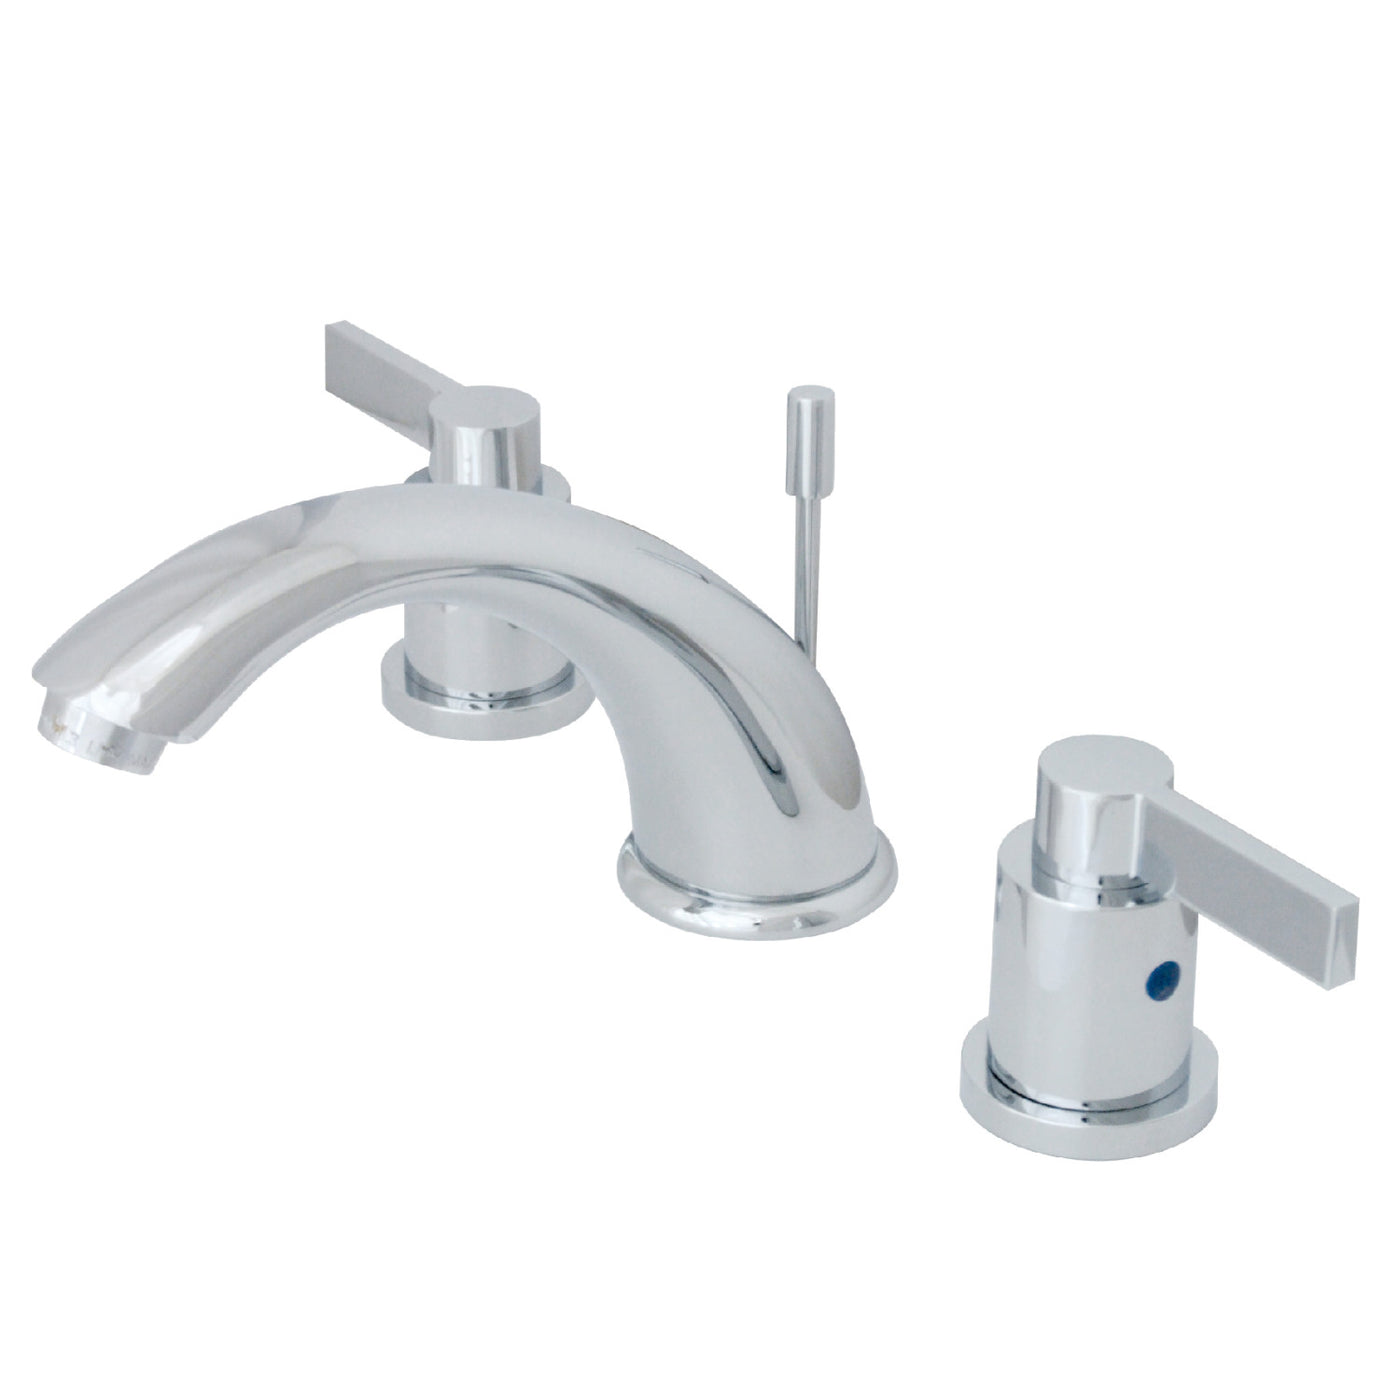 Elements of Design EB8961NDL Widespread Bathroom Faucet with Retail Pop-Up, Polished Chrome